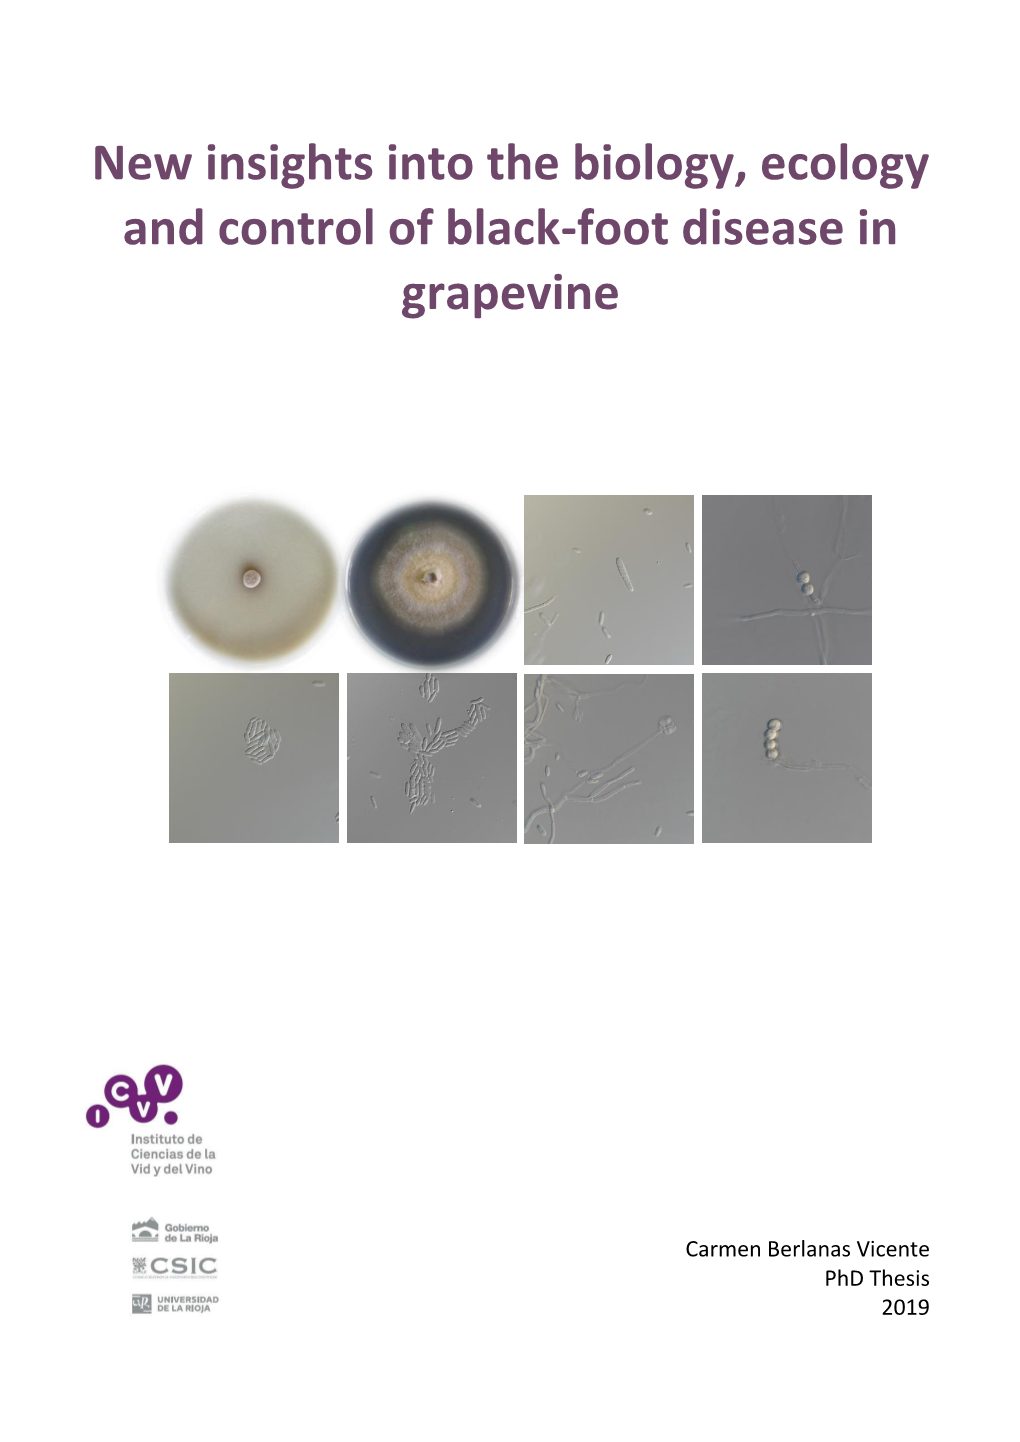 New Insights Into the Biology, Ecology and Control of Black-Foot Disease in Grapevine